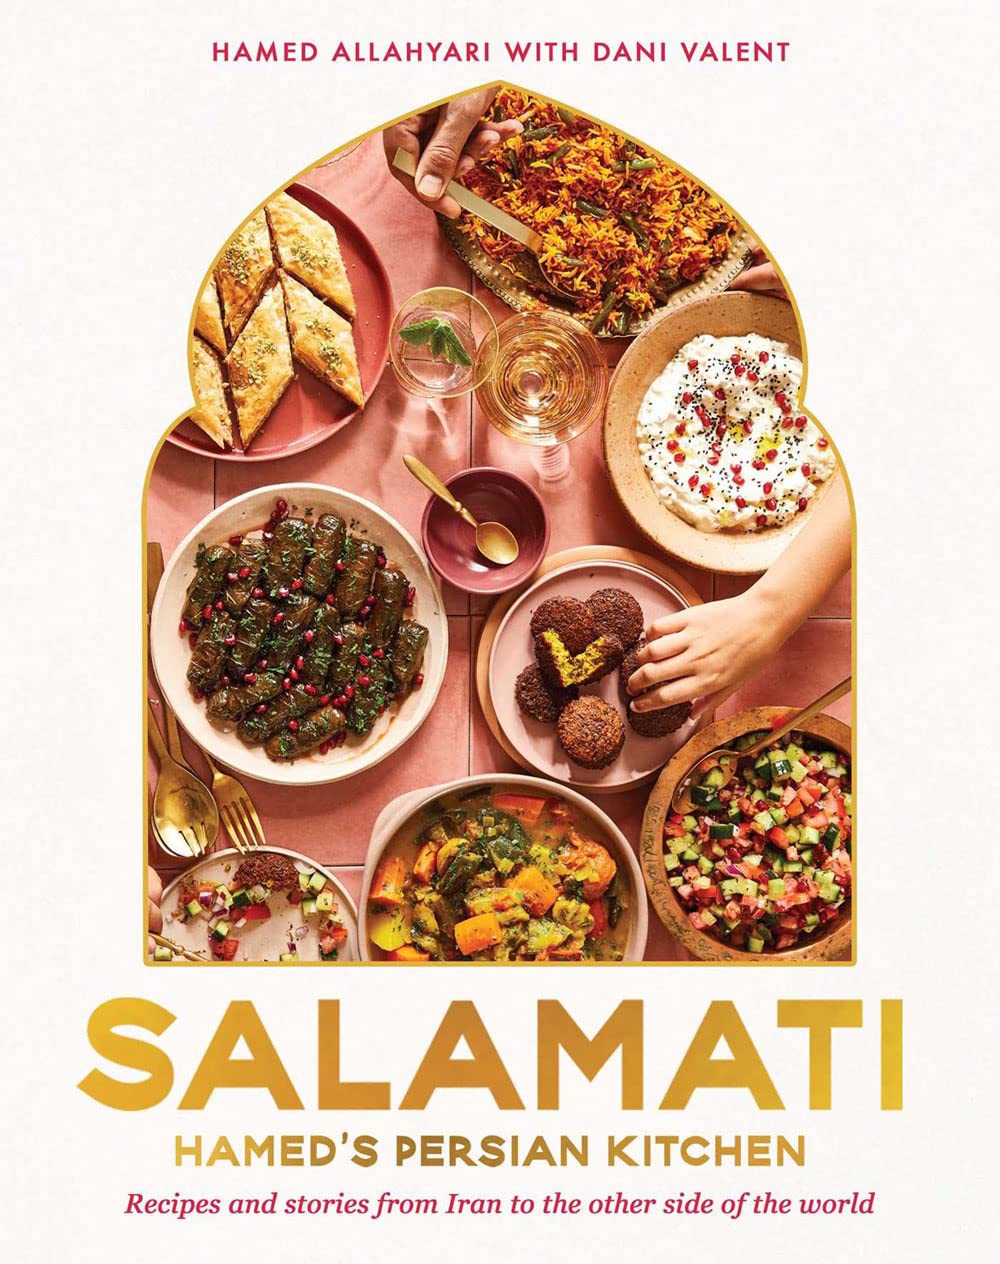 Salamati: Hamed's Persian Kitchen: Recipes and Stories from Iran to the Other Side of the World (Hamed Allahyari, Dani Valent)